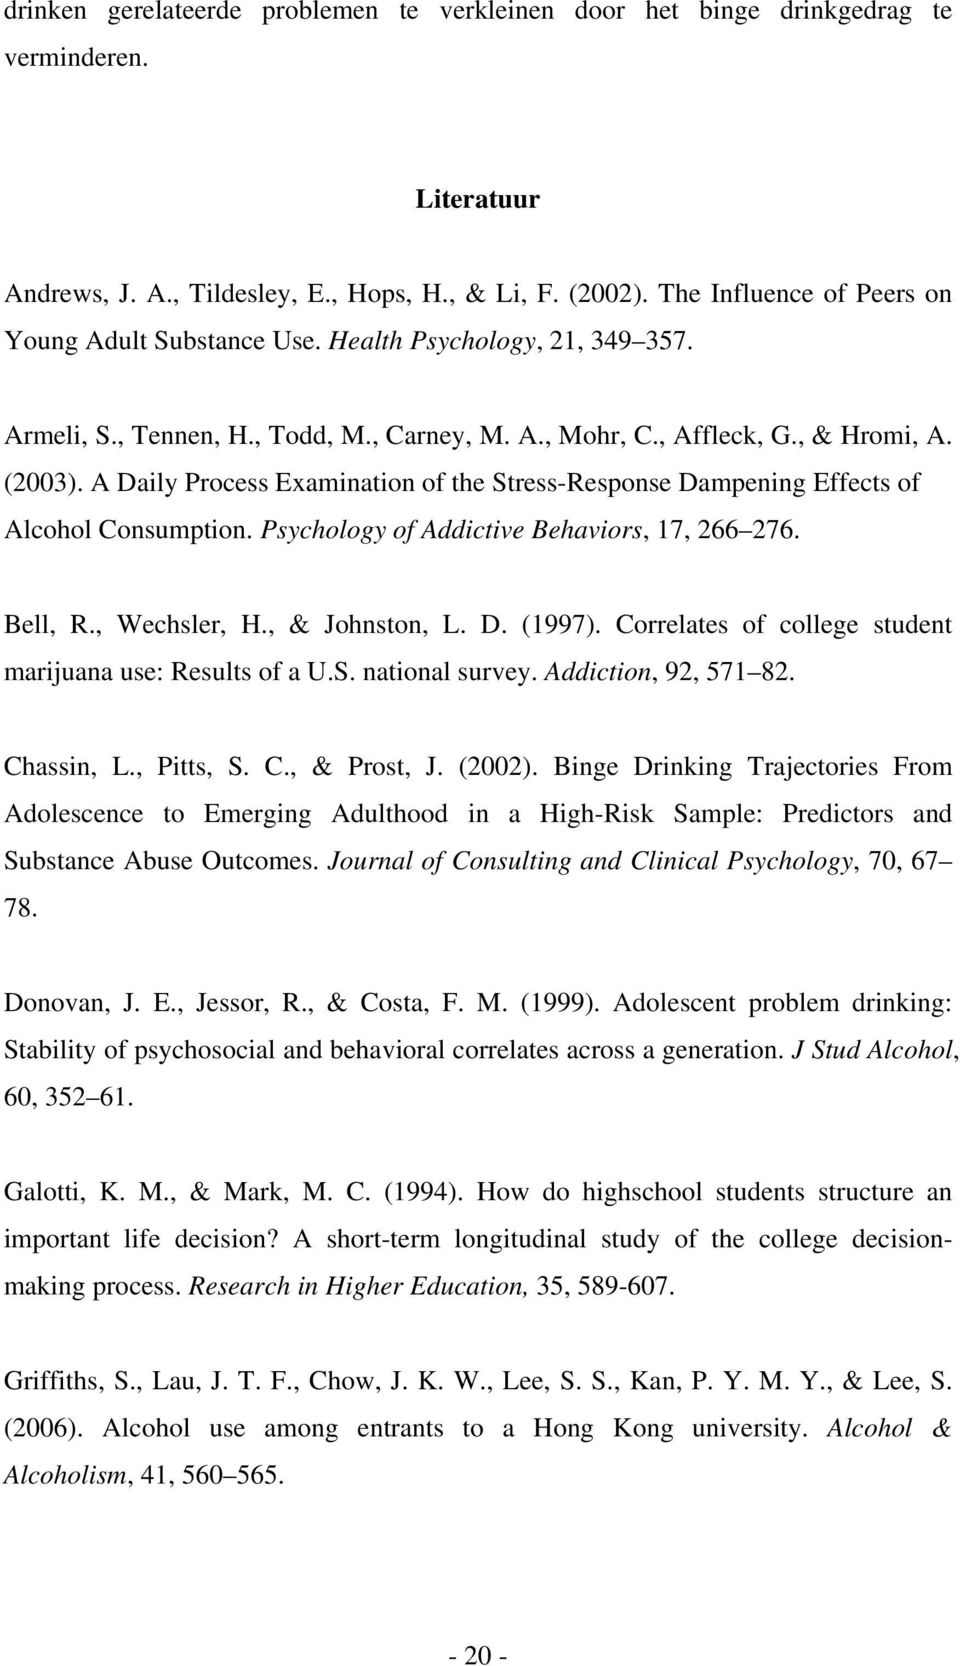 A Daily Process Examination of the Stress-Response Dampening Effects of Alcohol Consumption. Psychology of Addictive Behaviors, 17, 266 276. Bell, R., Wechsler, H., & Johnston, L. D. (1997).